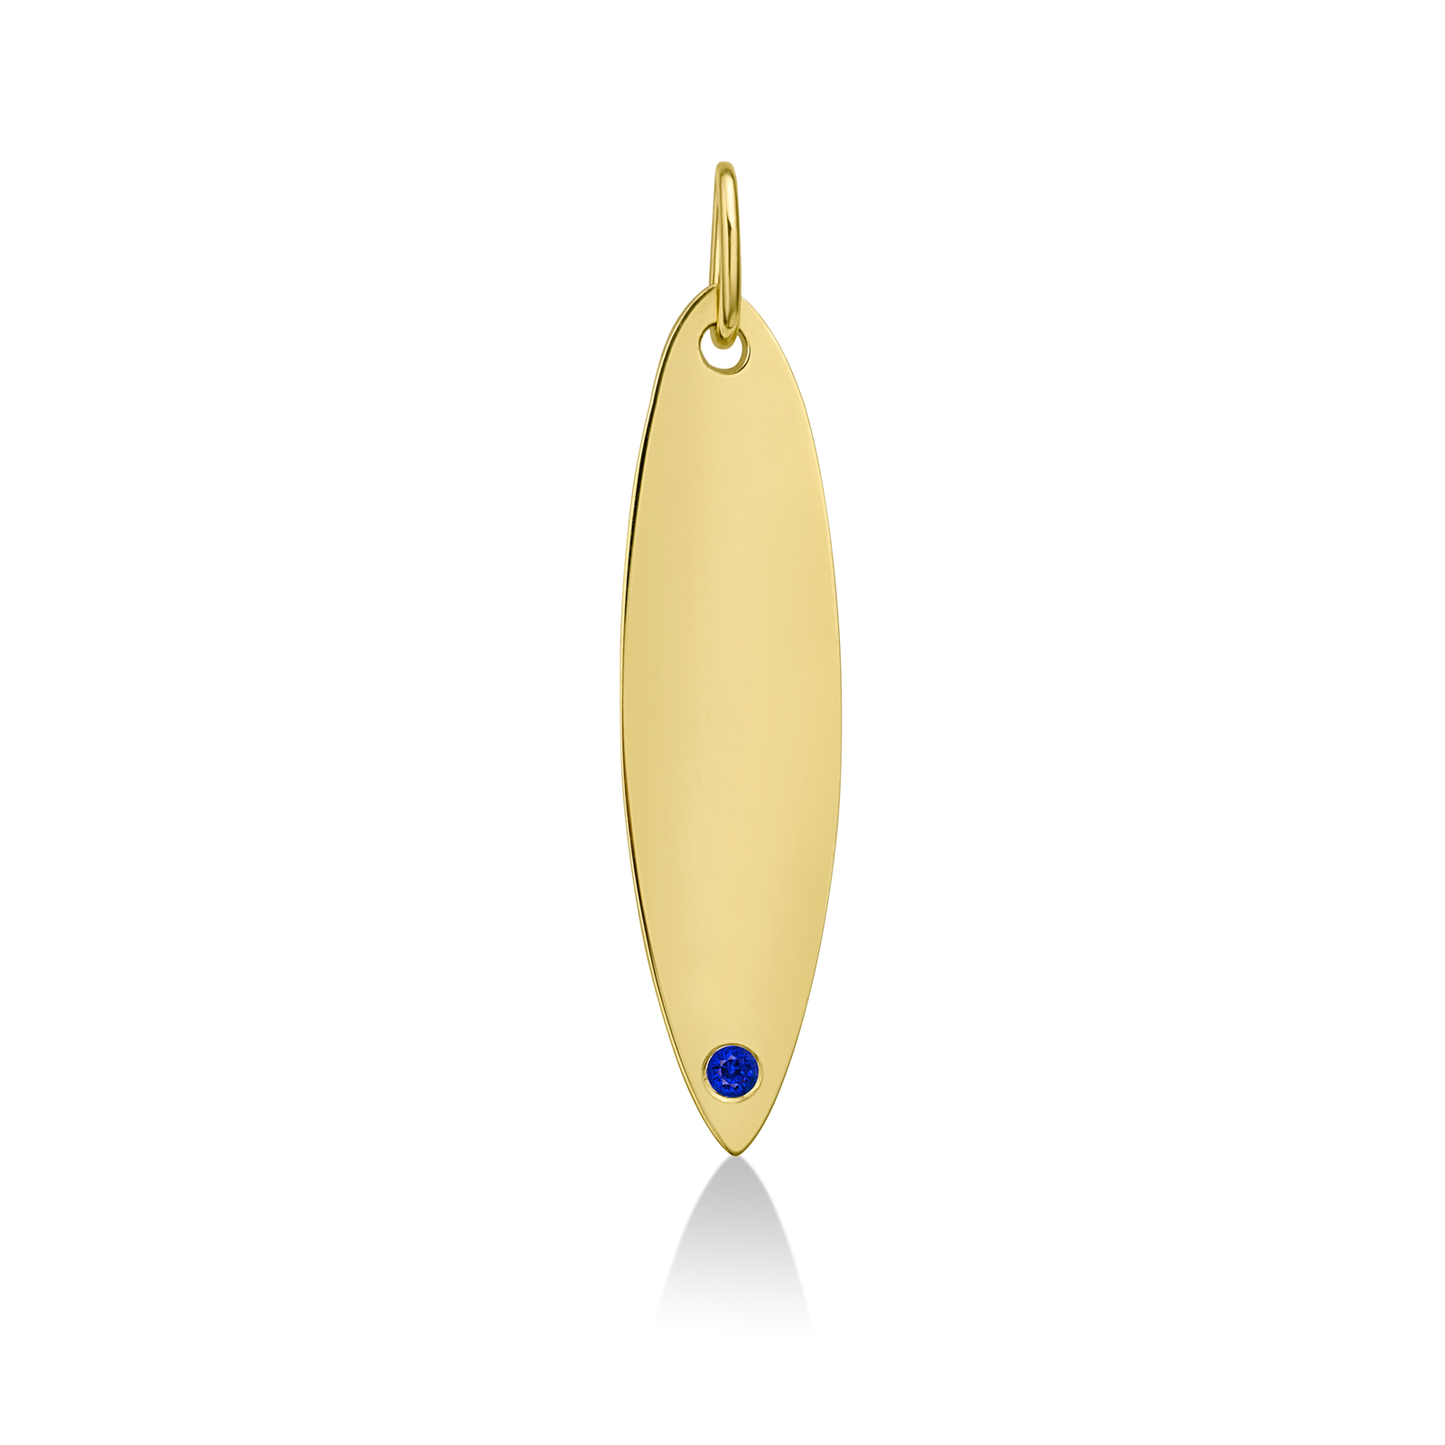 14k gold surfboard charm lock with sapphire